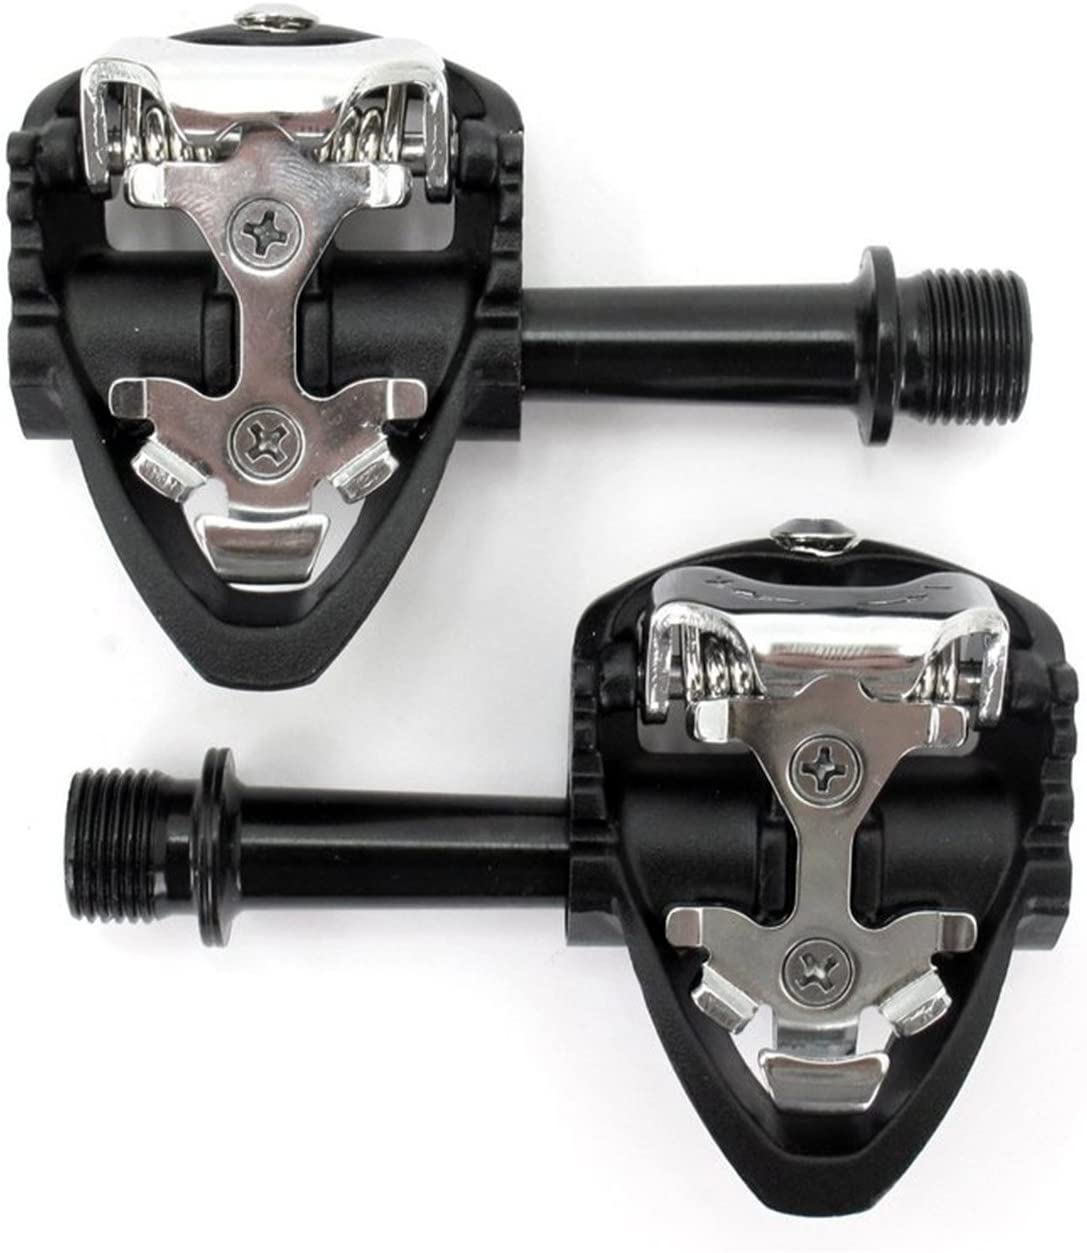 VP Components VP-163 Pedal - Cyclop.in